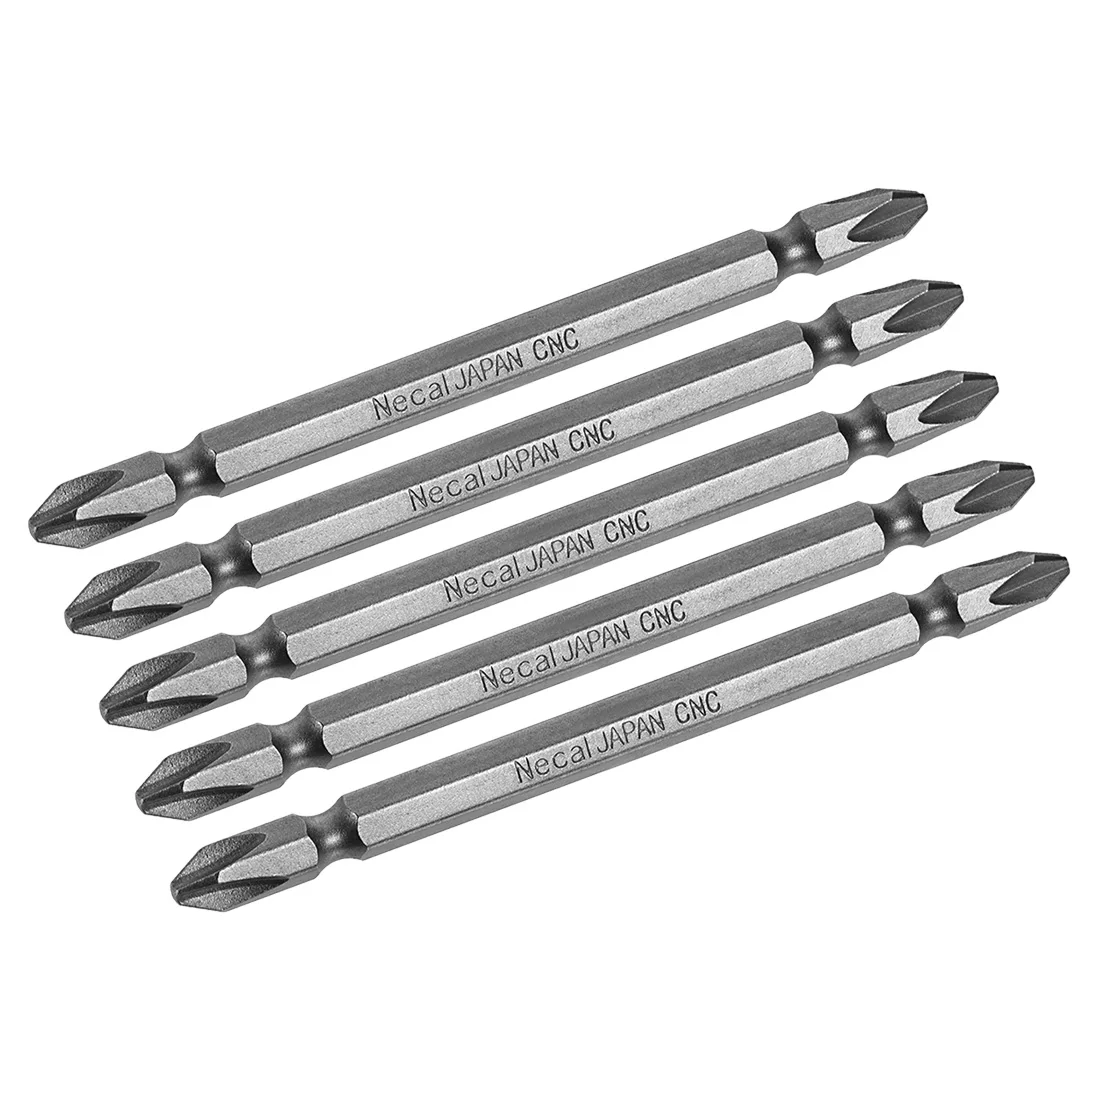 

uxcell 5pcs 1/4inch Hex Shank 100mm Length Magnetic Screwdriver PH2 Phillips Double-Head Screwdriver Bits S2 Alloy Steel